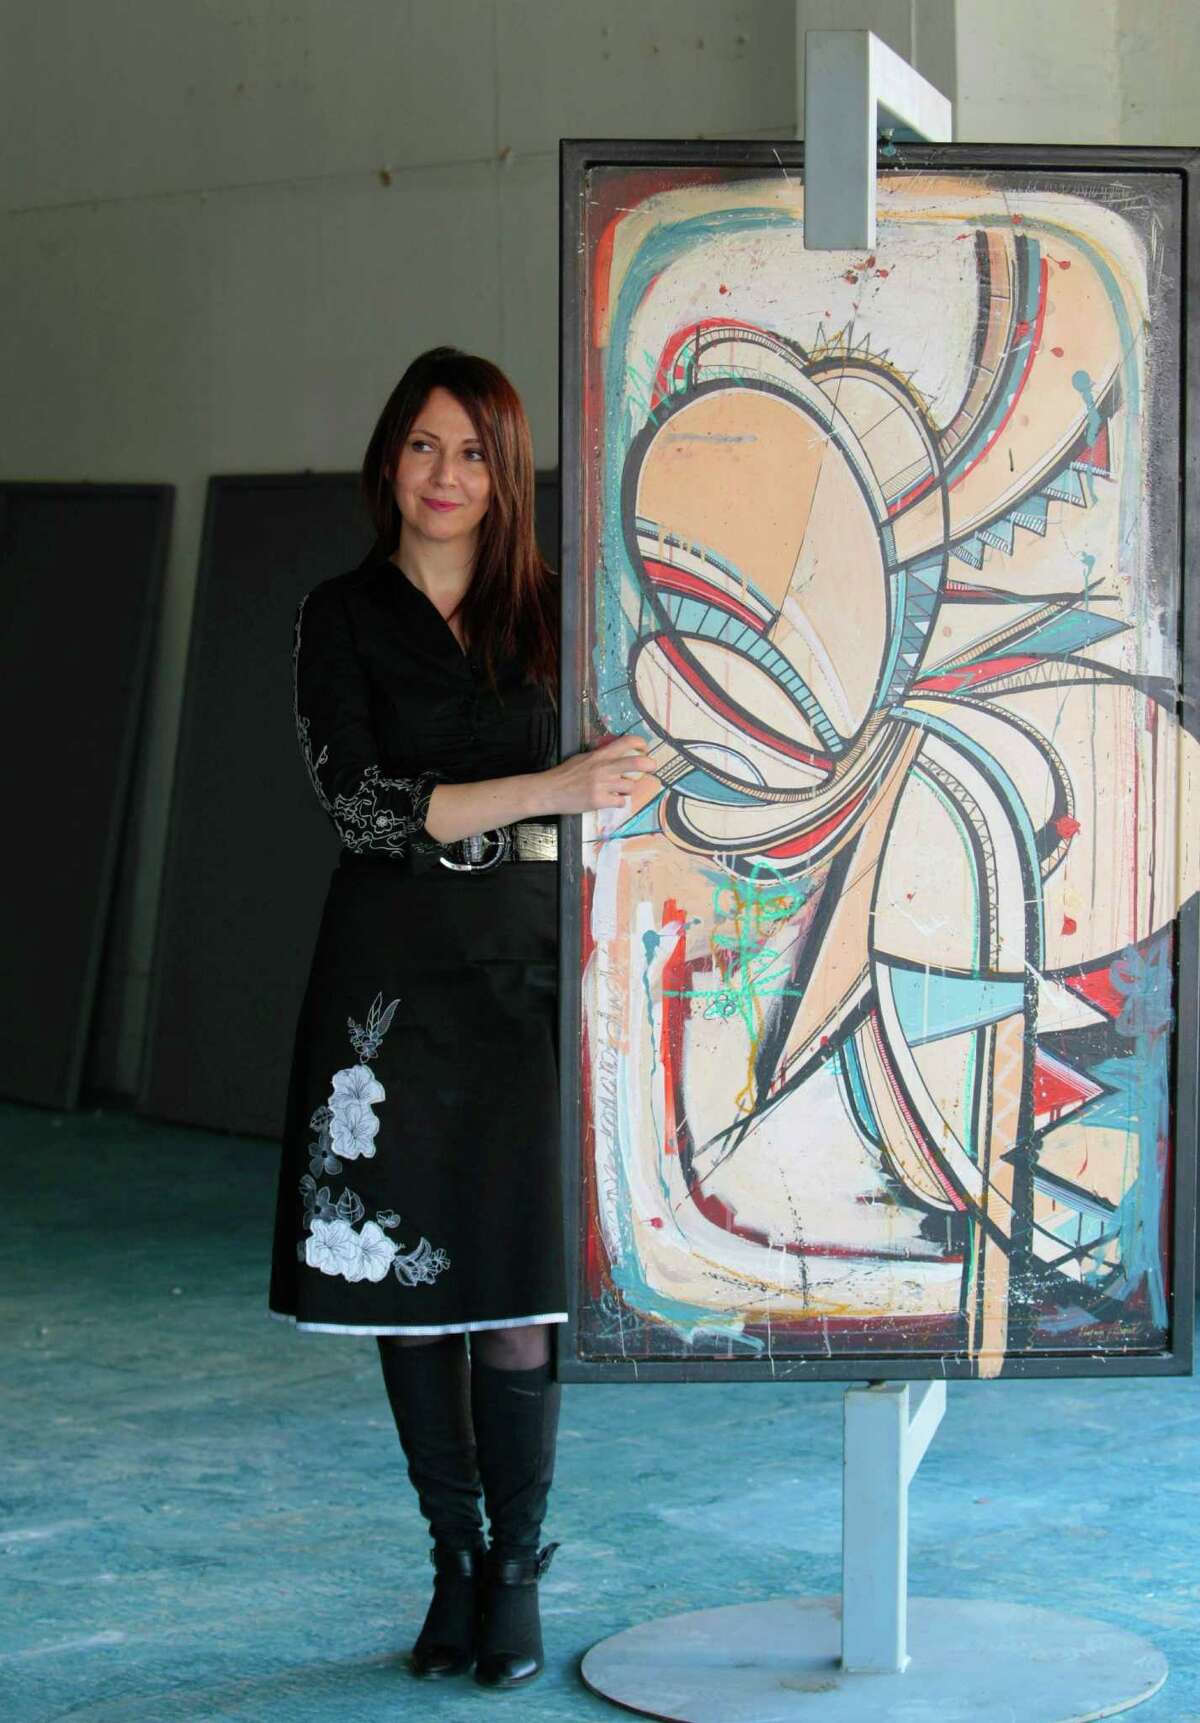 Karine Parker-Lemoyne, executive director of the Texan French Alliance for the Arts, says the swinging, painted steel doors - this one by French artist Romain Froquet - will be placed on display at 13 locations around Houston.